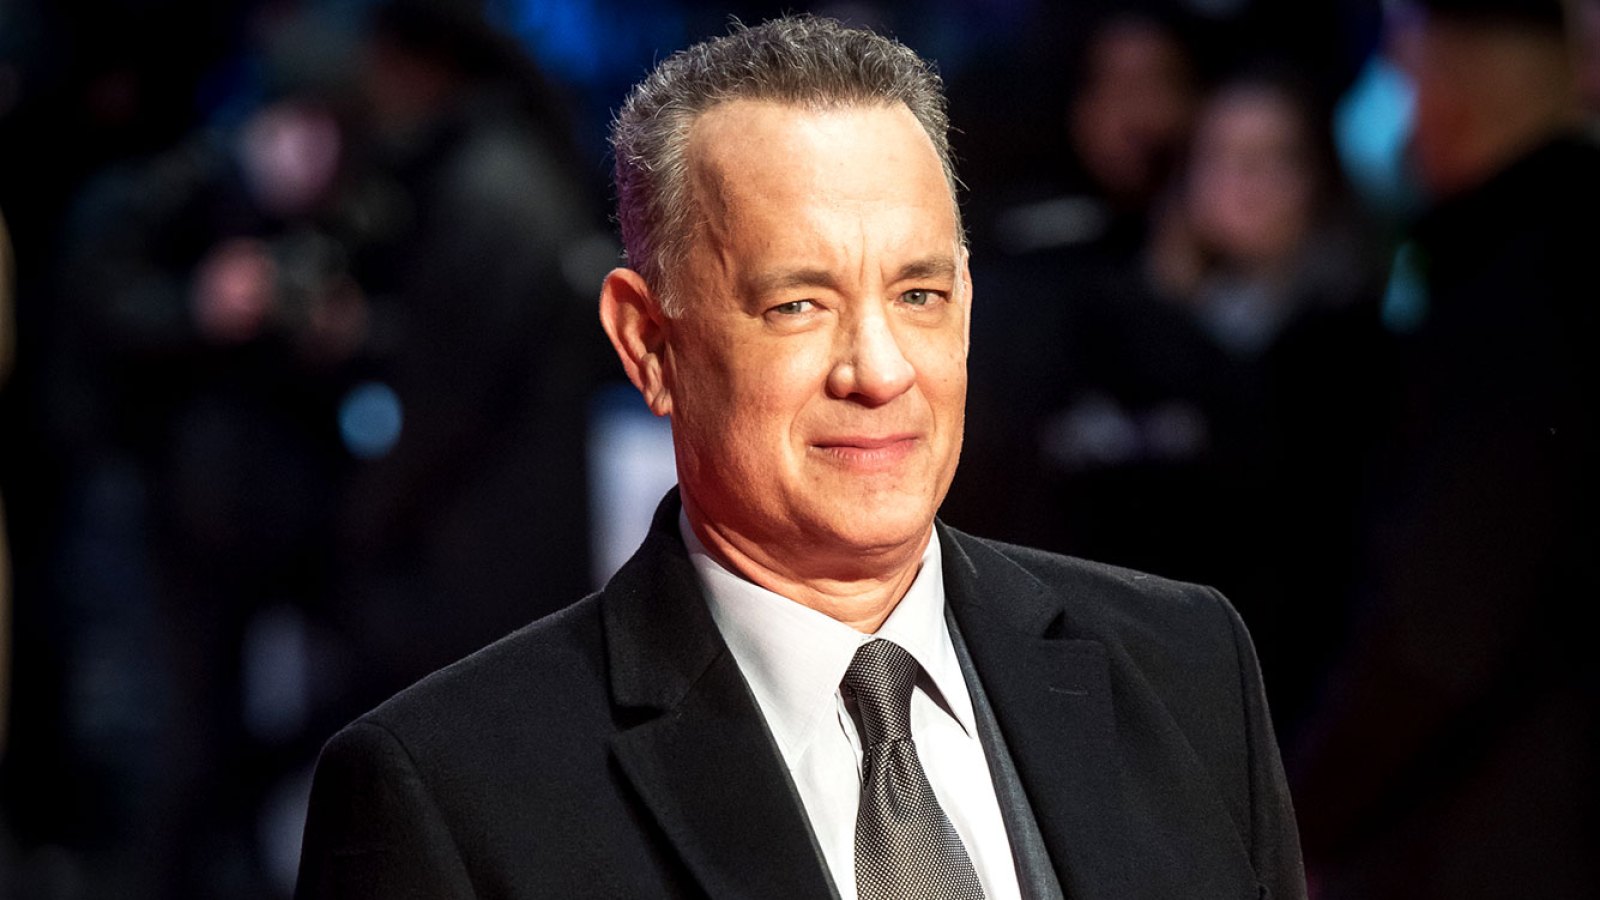 Tom Hanks' Grandkids Have No Idea He’s Famous: ‘They Don’t Care’